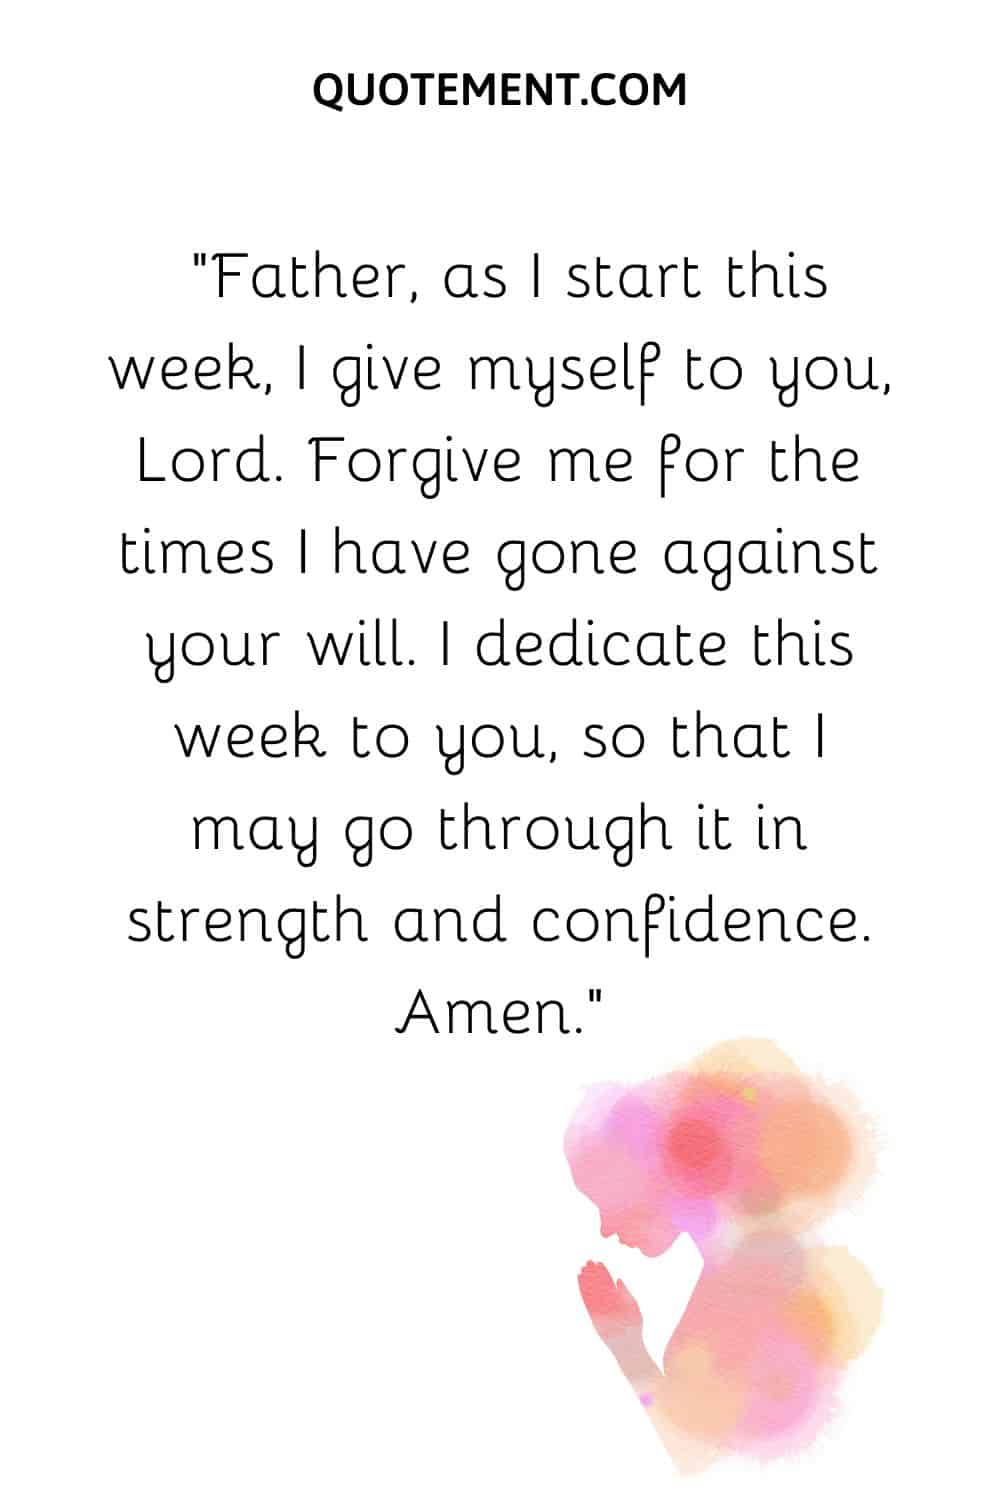 Father, as I start this week, I give myself to you, Lord